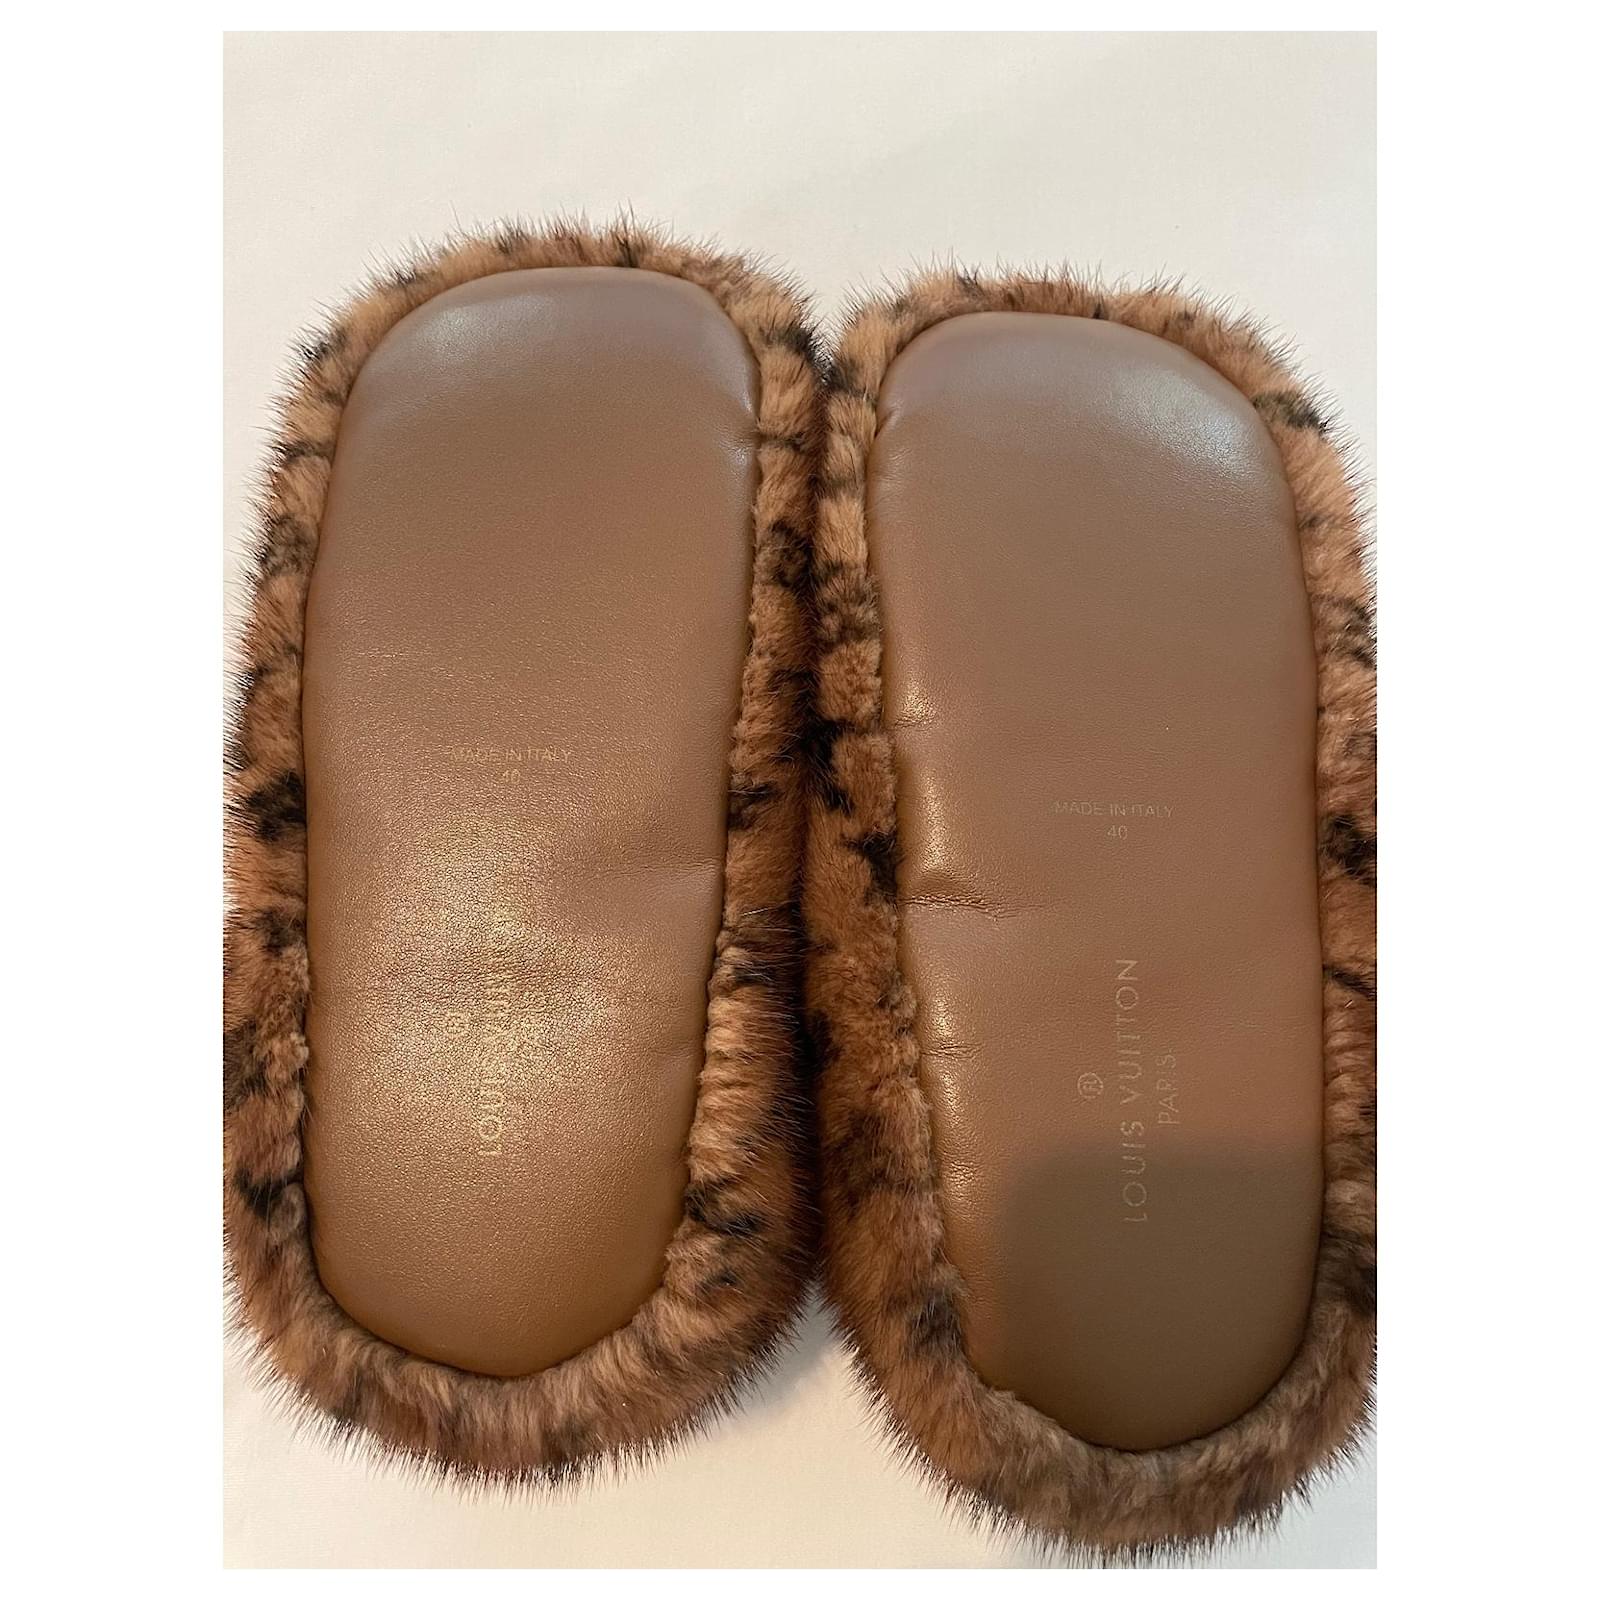 Louis Vuitton slippers  Louis vuitton slippers, Slippers, Fluffy shoes